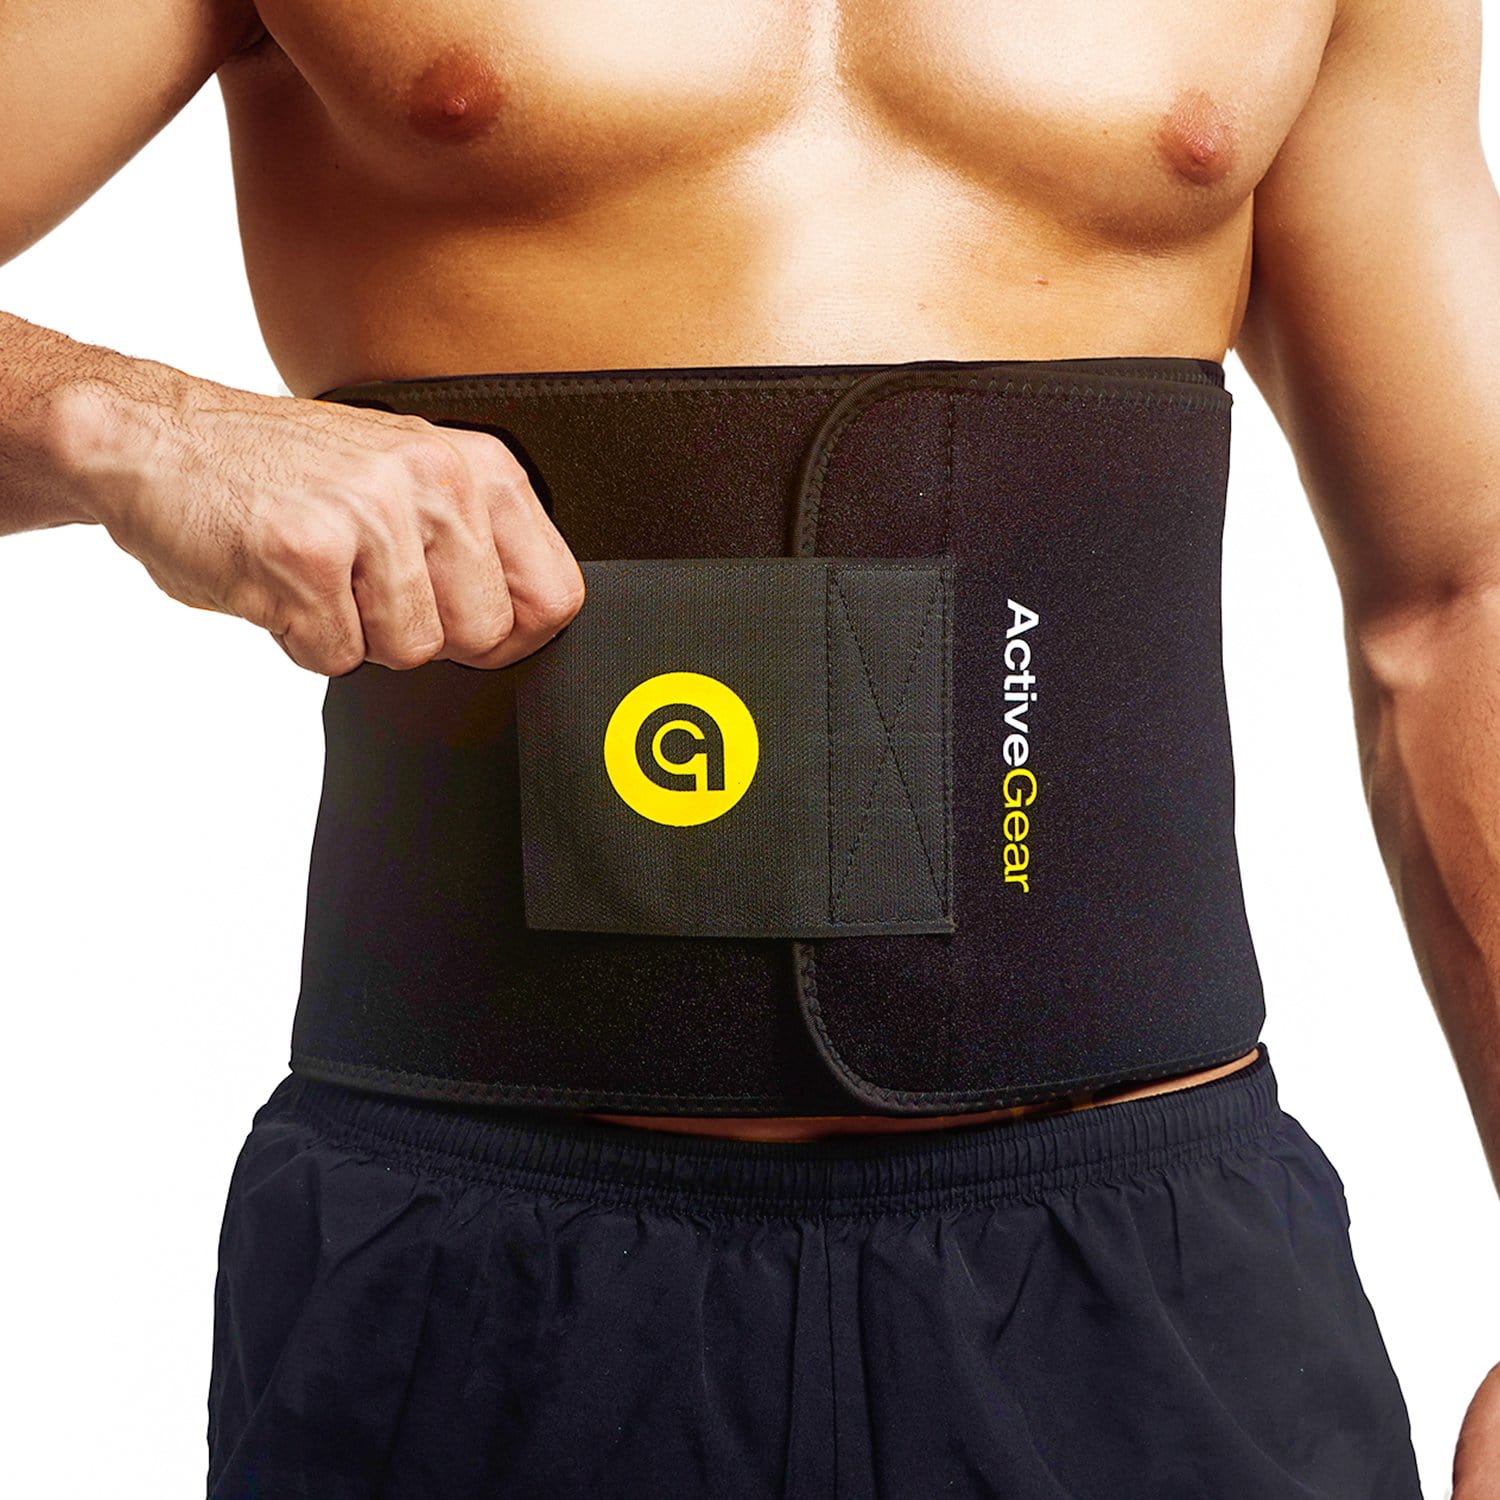 15 Shop ActiveGear ideas  fitness support, fitness, sports accessories